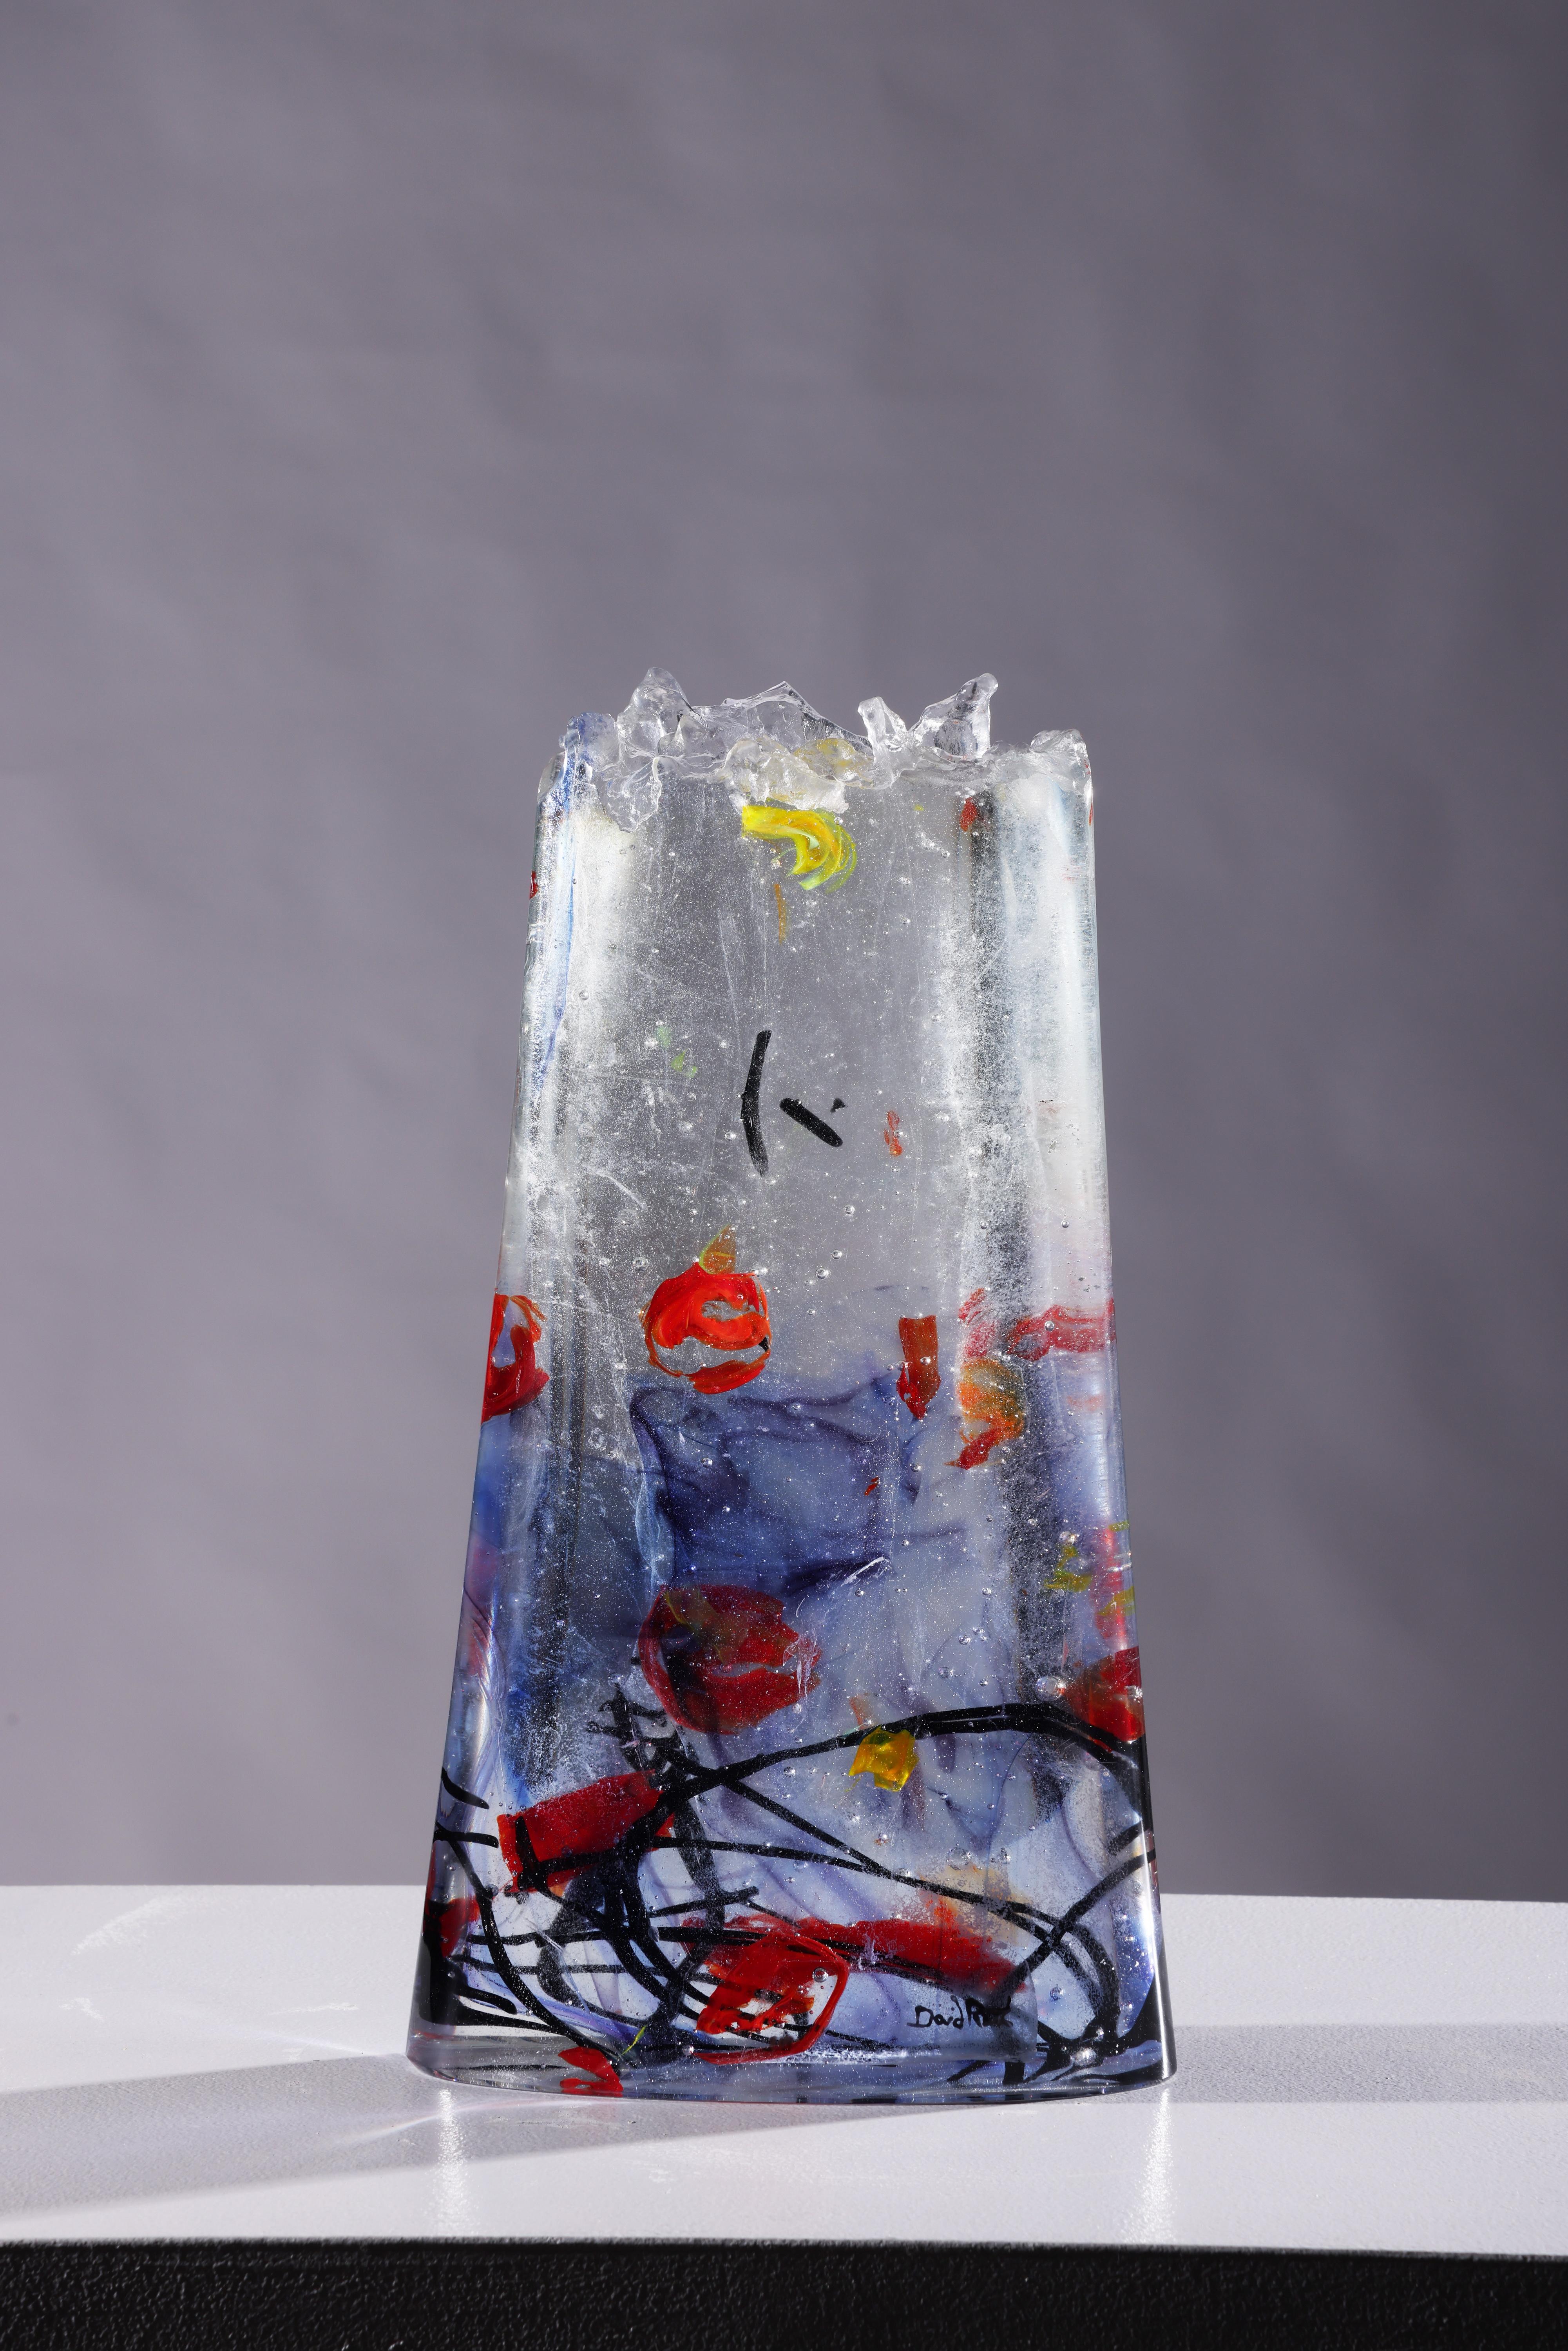 'Kotu' is a contemporary abstract cast glass sculpture by David Ruth from his Internal Space series. David wanted to capture pictorial quality of his previous cast internal pieces, but in a solid standing form. This fusing of various colored glass